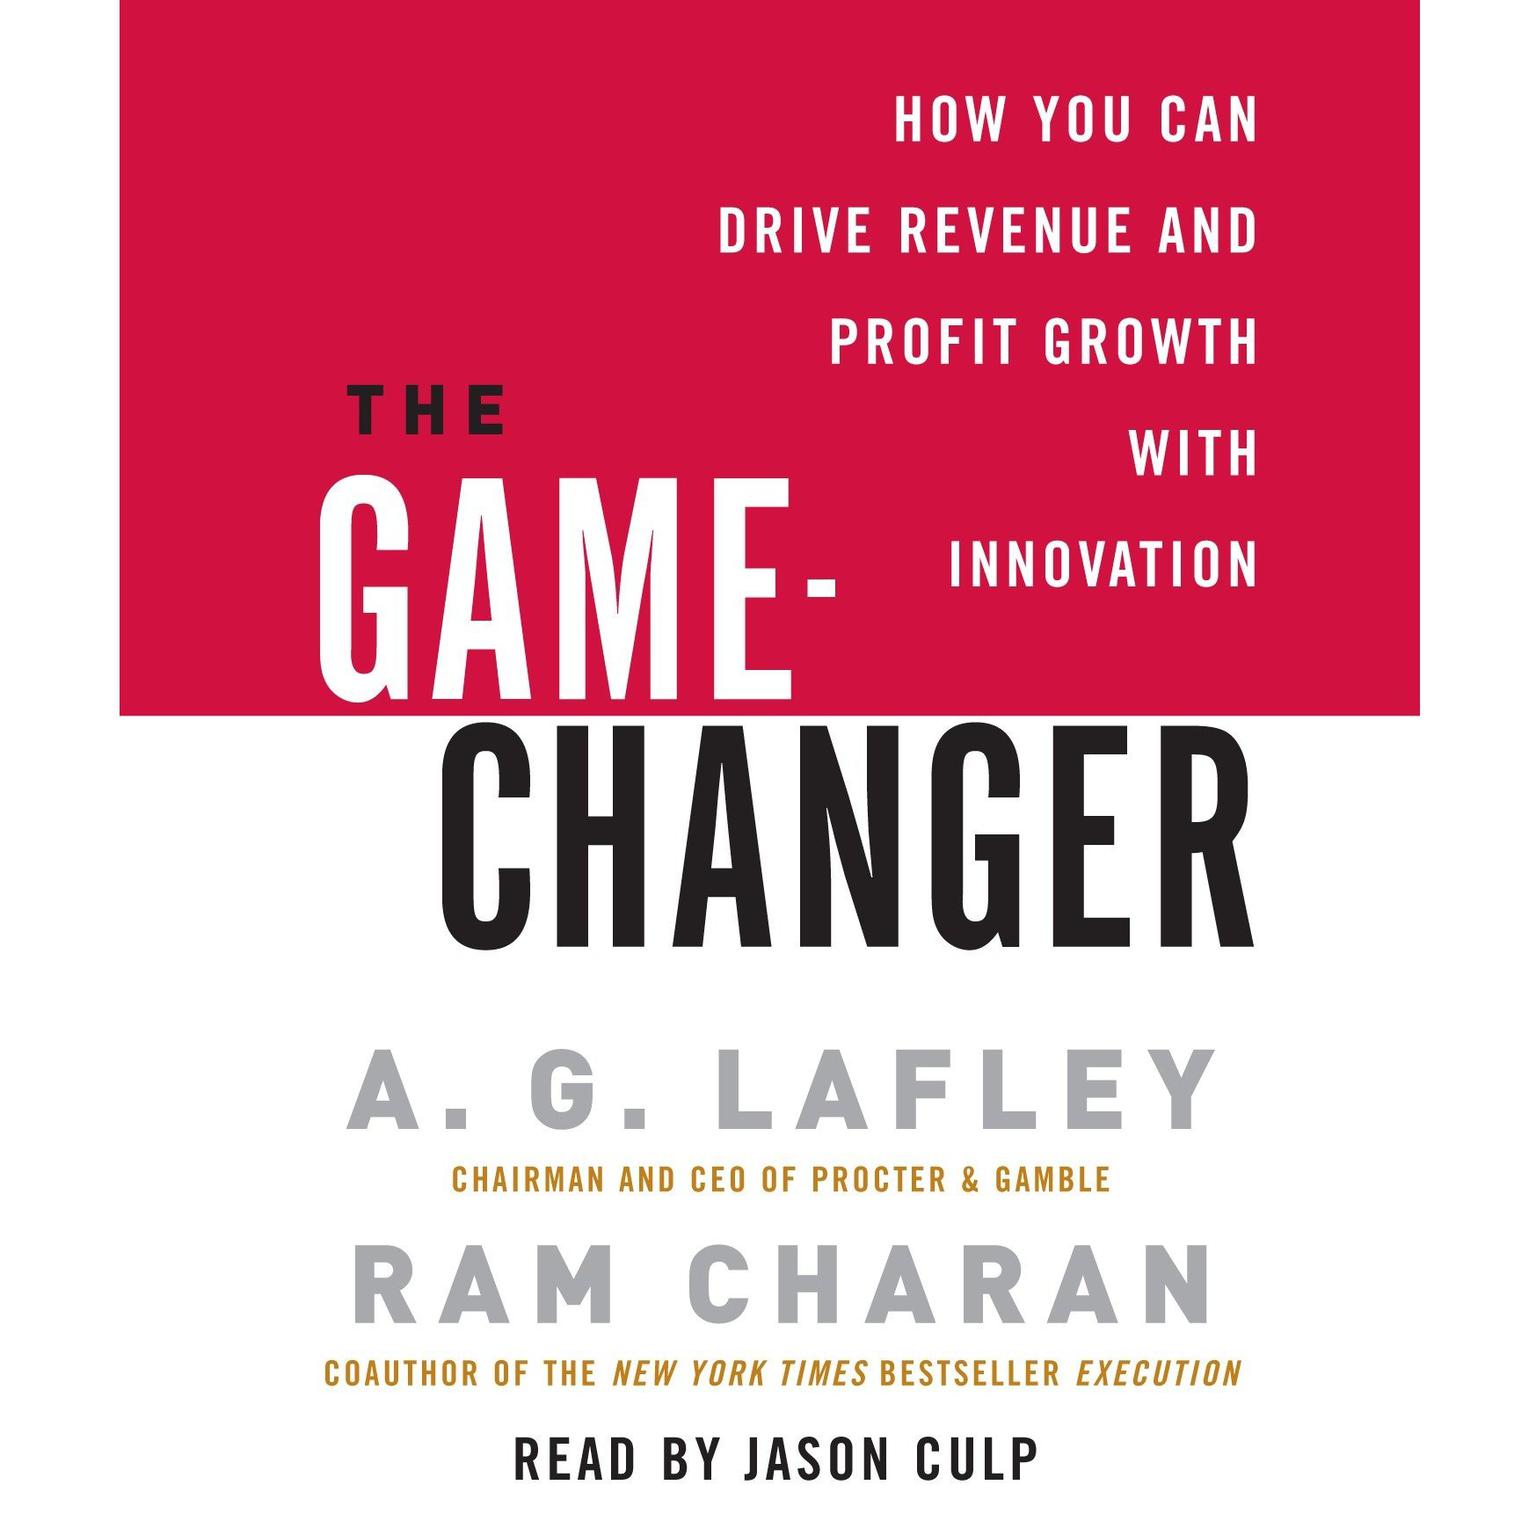 The Game-Changer (Abridged): How You Can Drive Revenue and Profit Growth with Innovation Audiobook, by A. G. Lafley